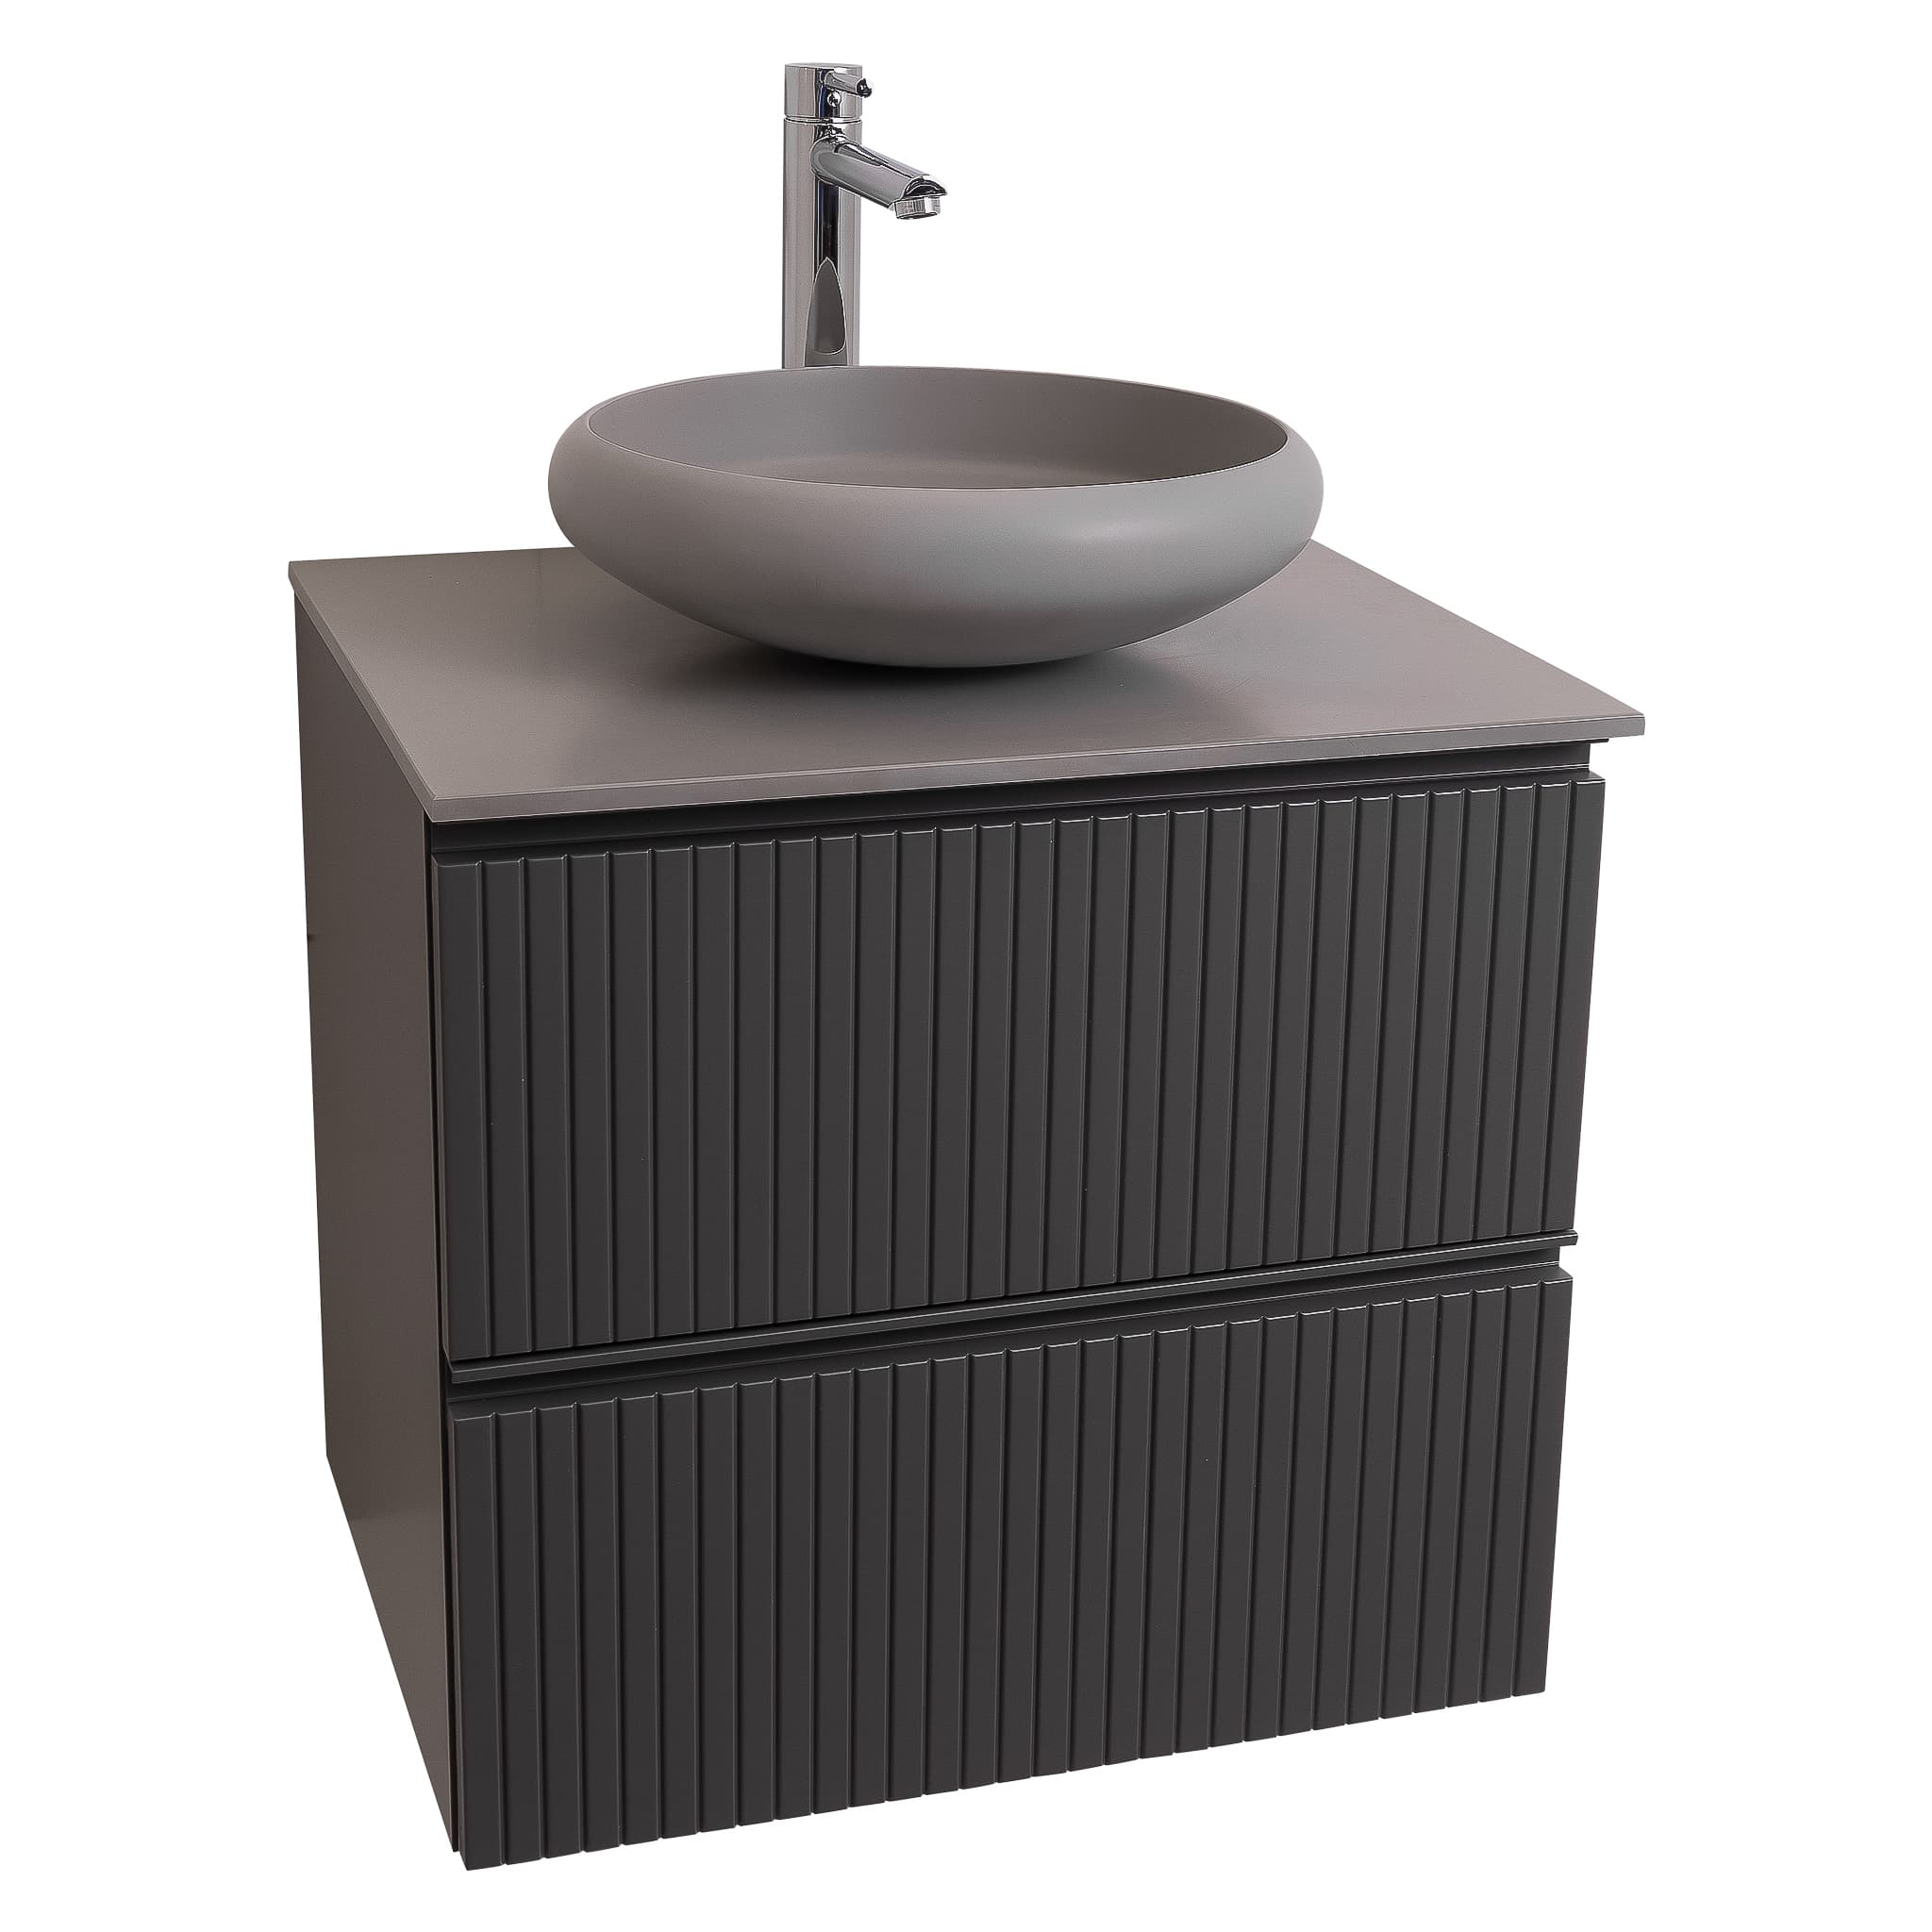 Ares 23.5 Matte Grey Cabinet, Solid Surface Flat Grey Counter And Round Solid Surface Grey Basin 1153, Wall Mounted Modern Vanity Set